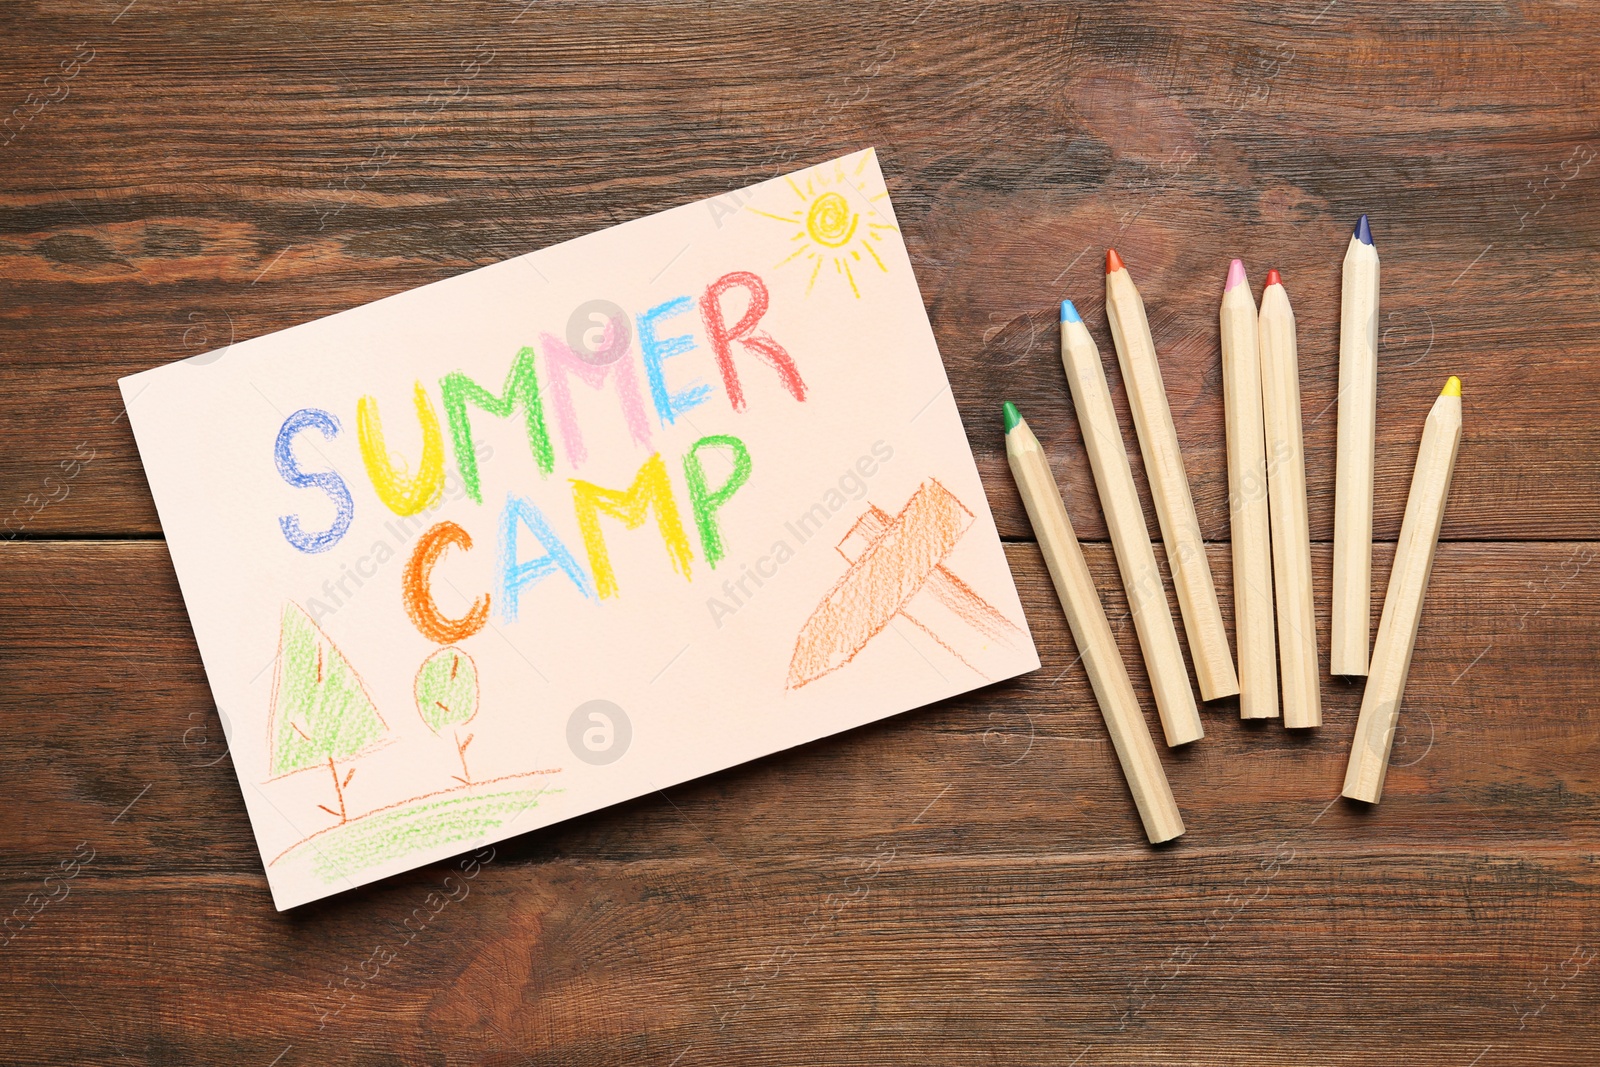 Photo of Card with text SUMMER CAMP, drawings and colorful pencils on wooden table, flat lay